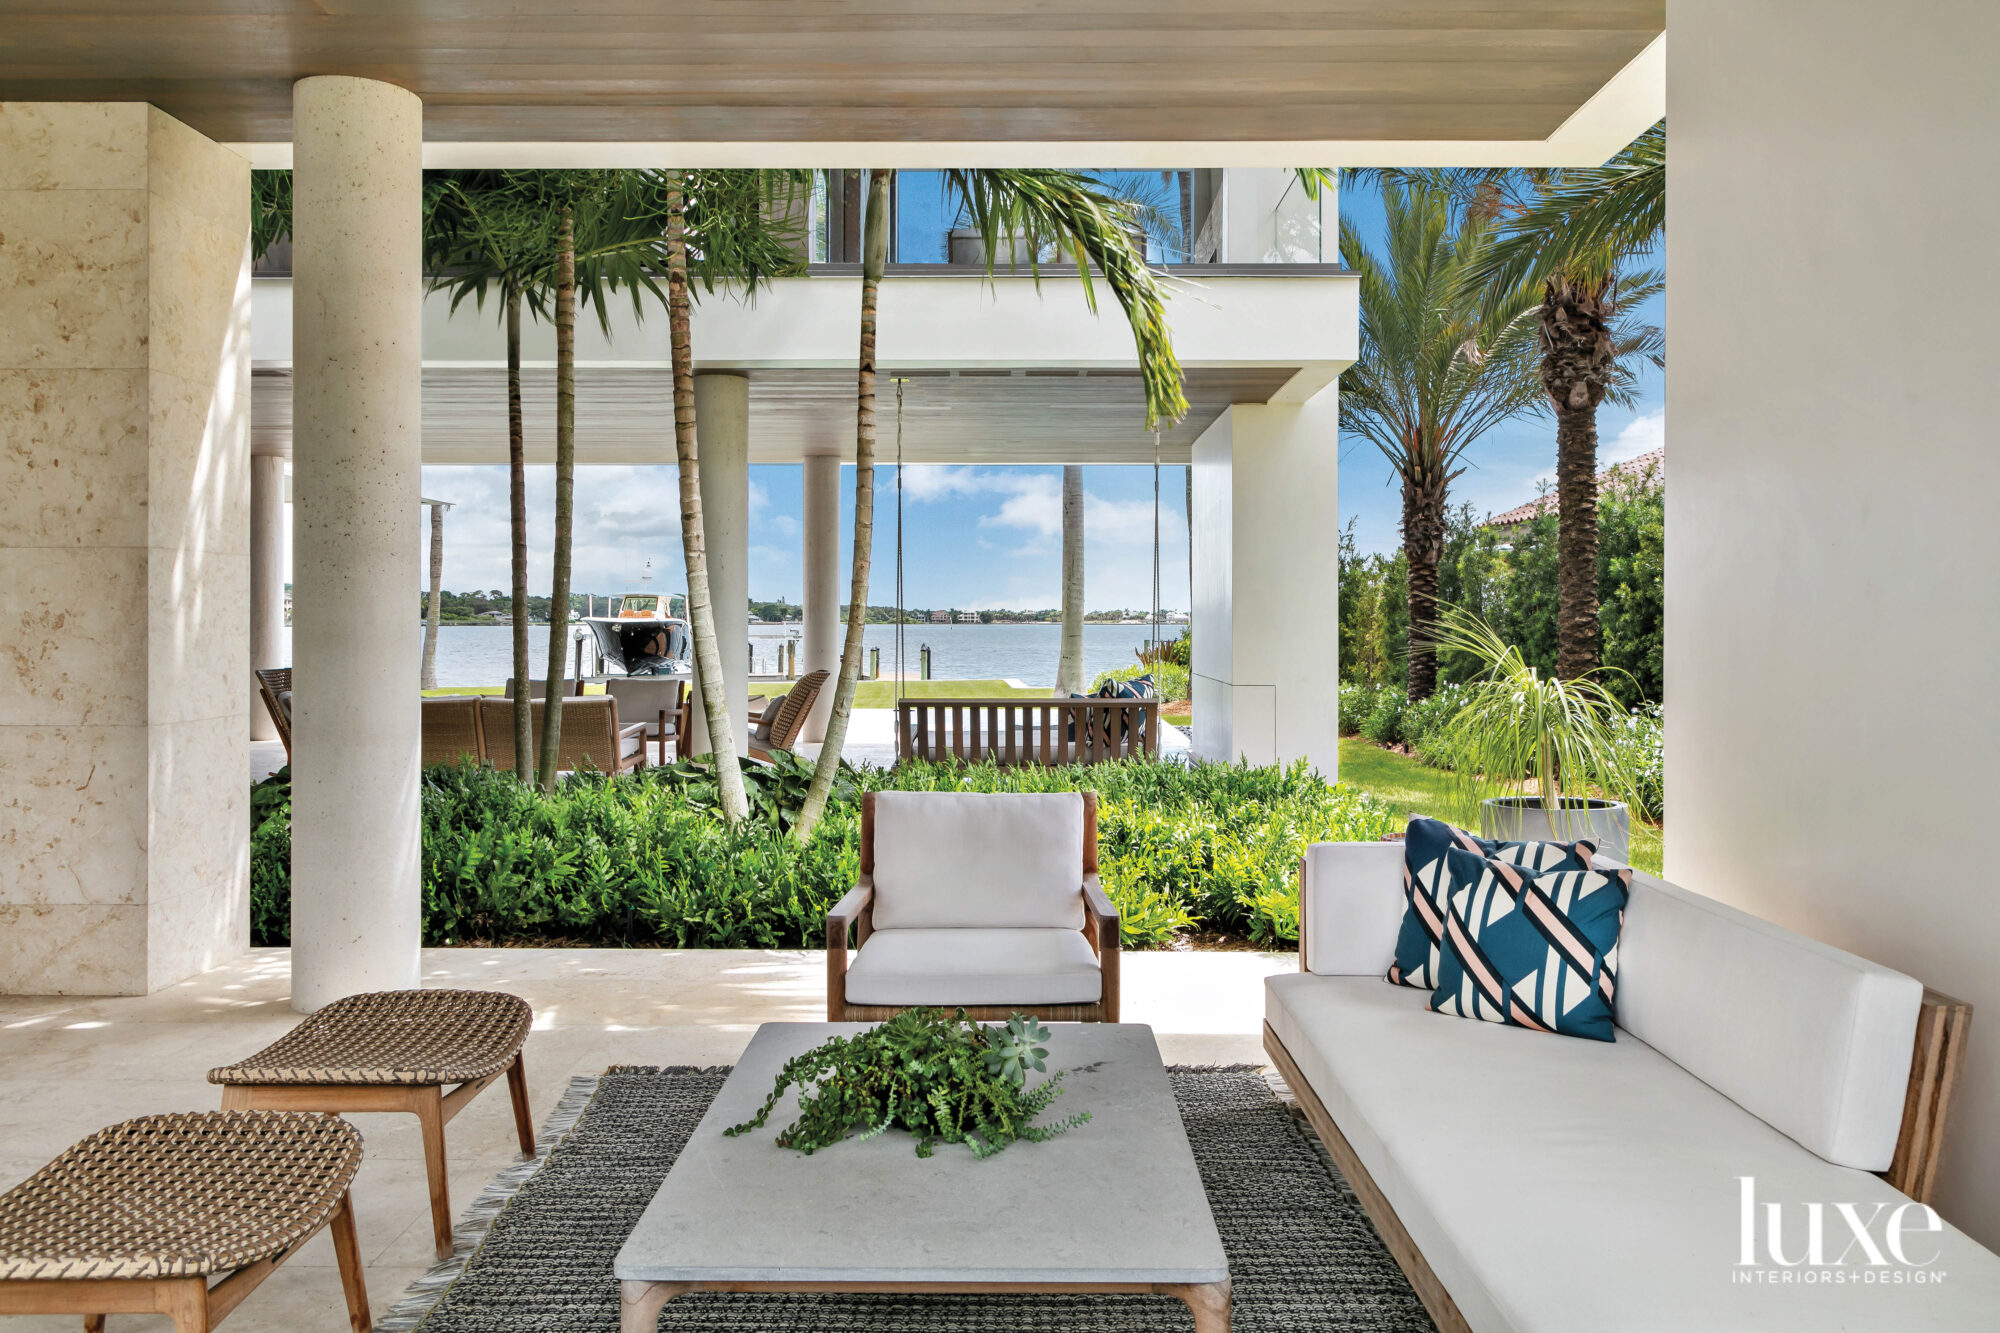 Outdoor living space with lounge chairs, daybed and ottomans.